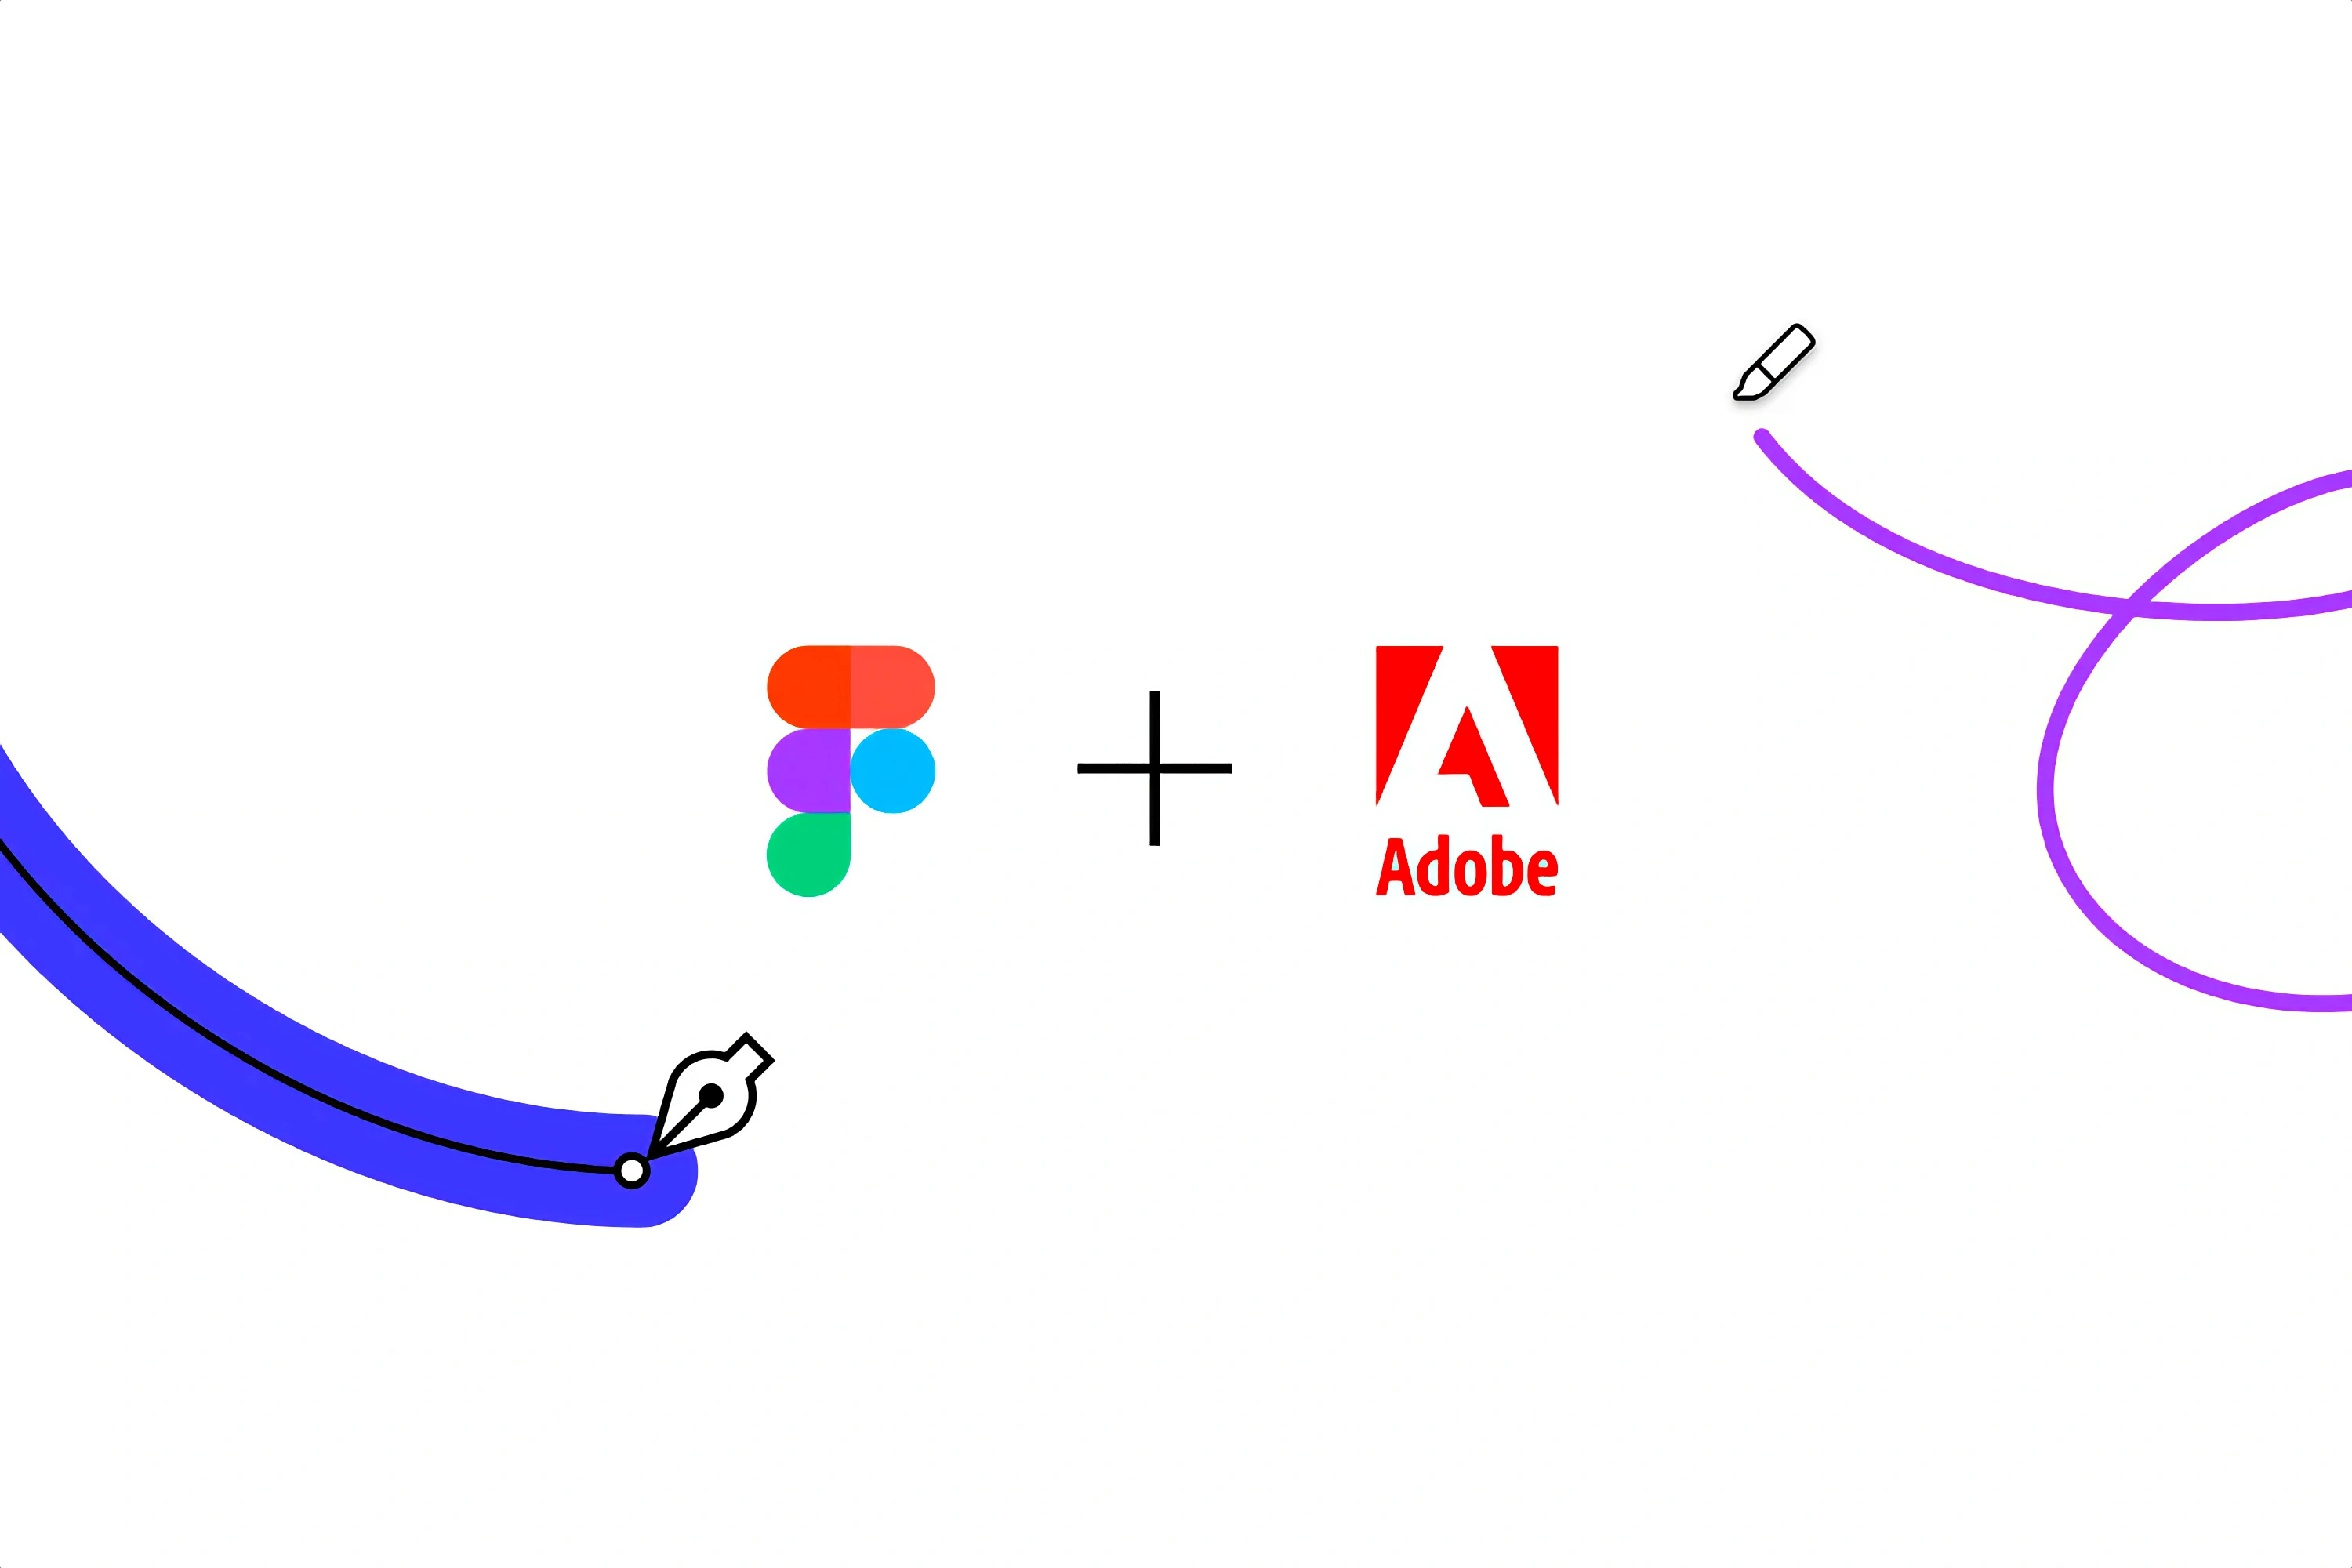 Adobe Agrees to Buy Figma in $20 Billion Software Deal